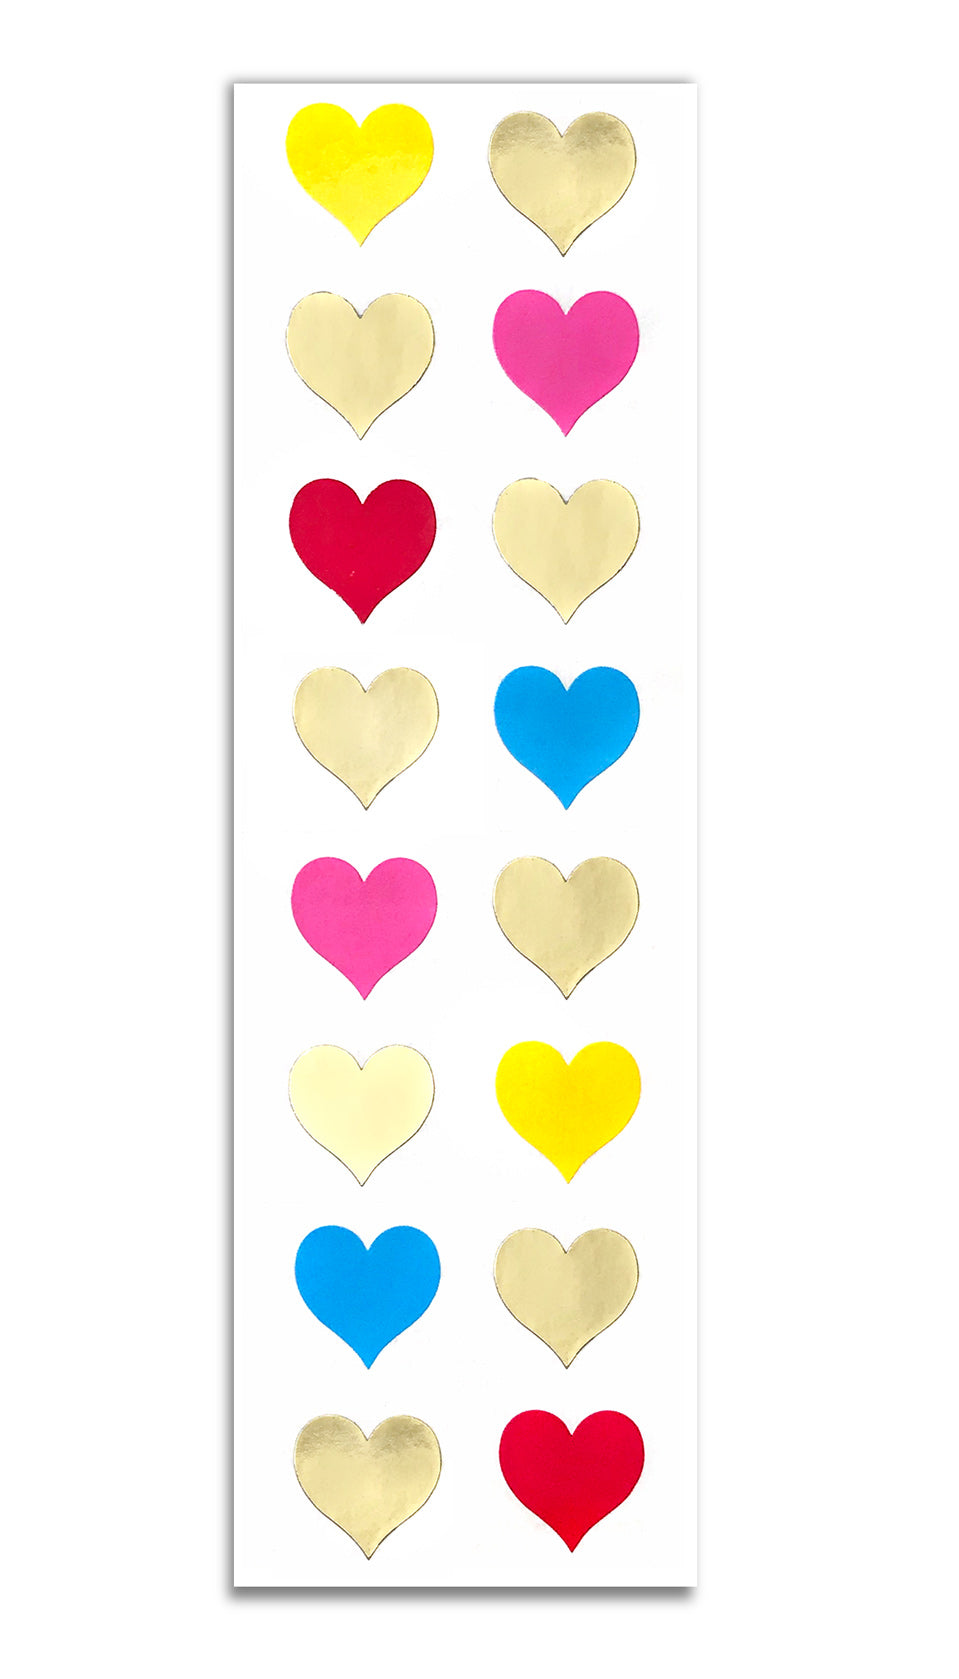 Hearts Tagged small heart stickers - Mrs. Grossman's